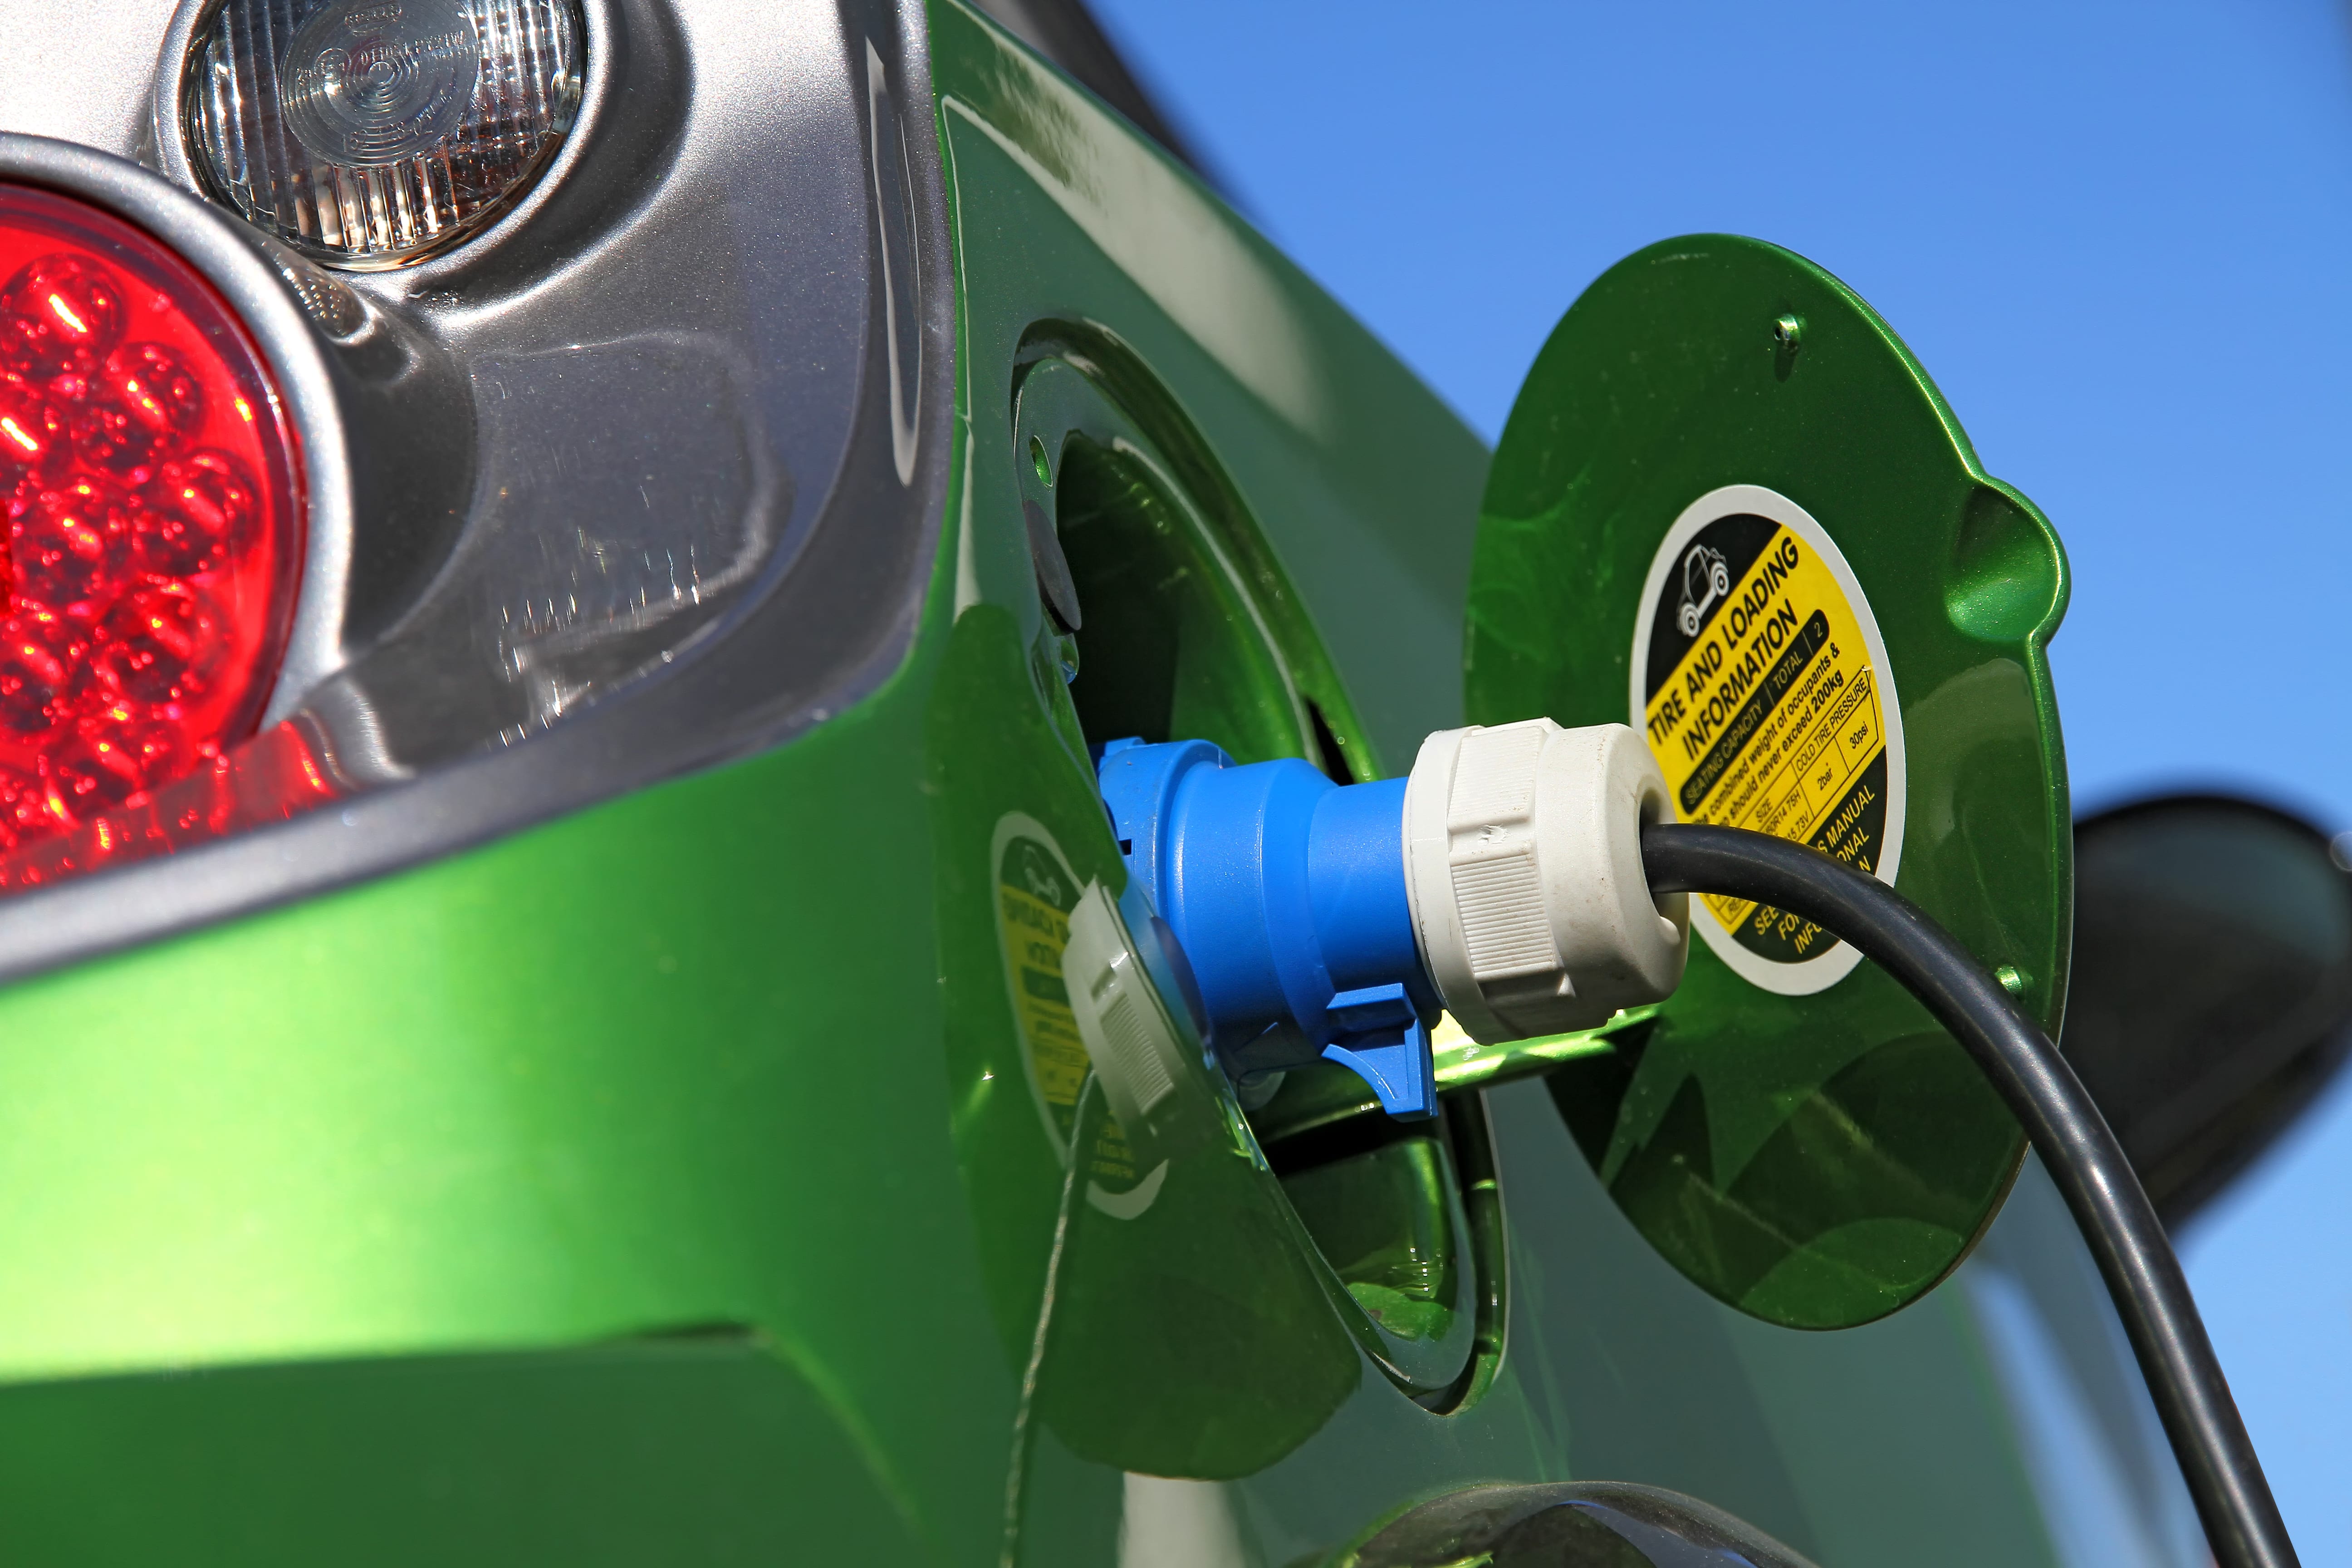 Industry experts meet to discuss EV Professional Standard